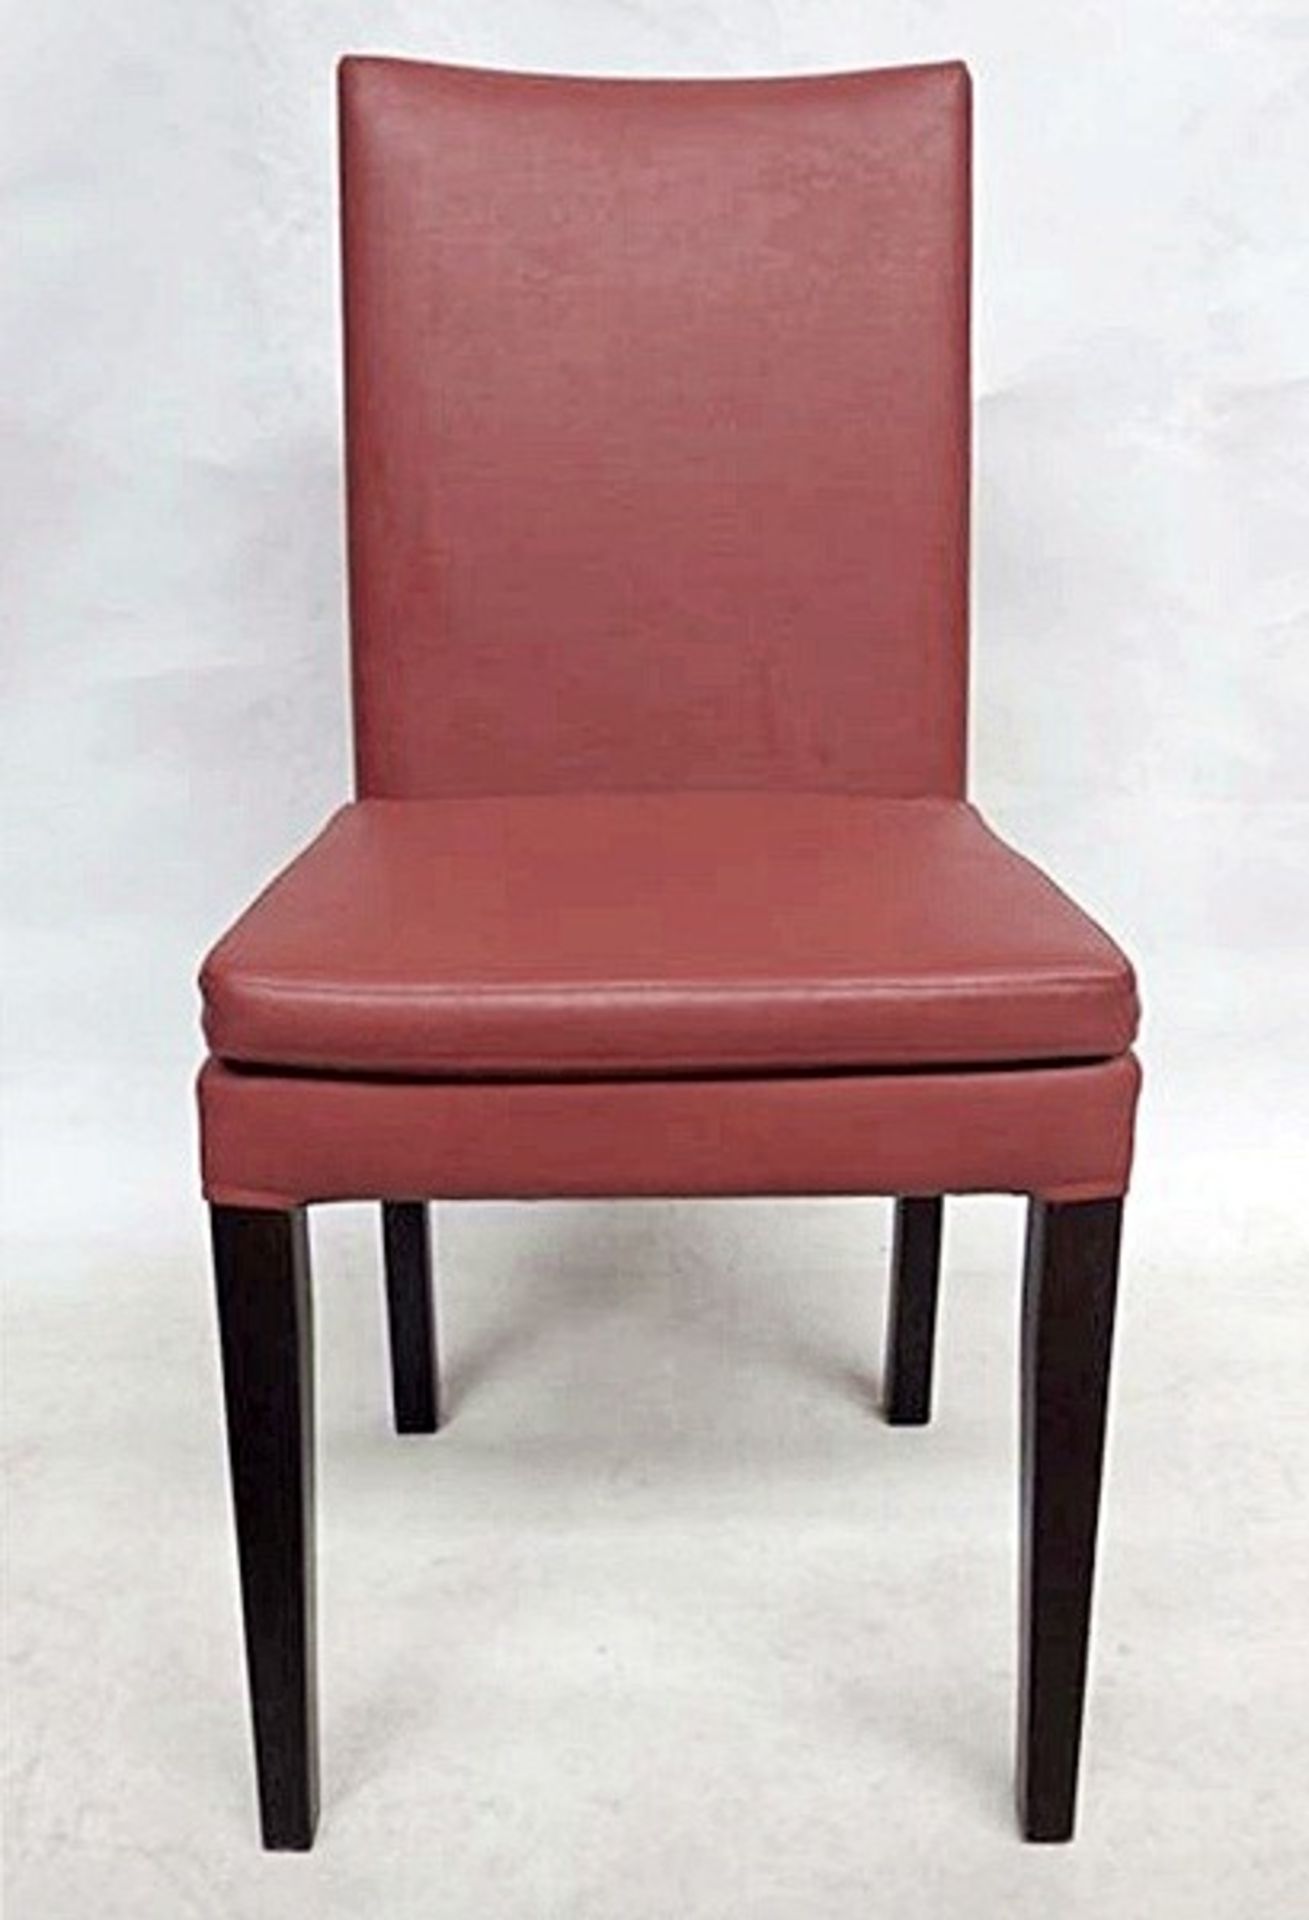 1 x Bespoke Chair Upholstered In A Deep Red Leather - Handcrafted & Upholstered By British Craftsmen - Image 2 of 3